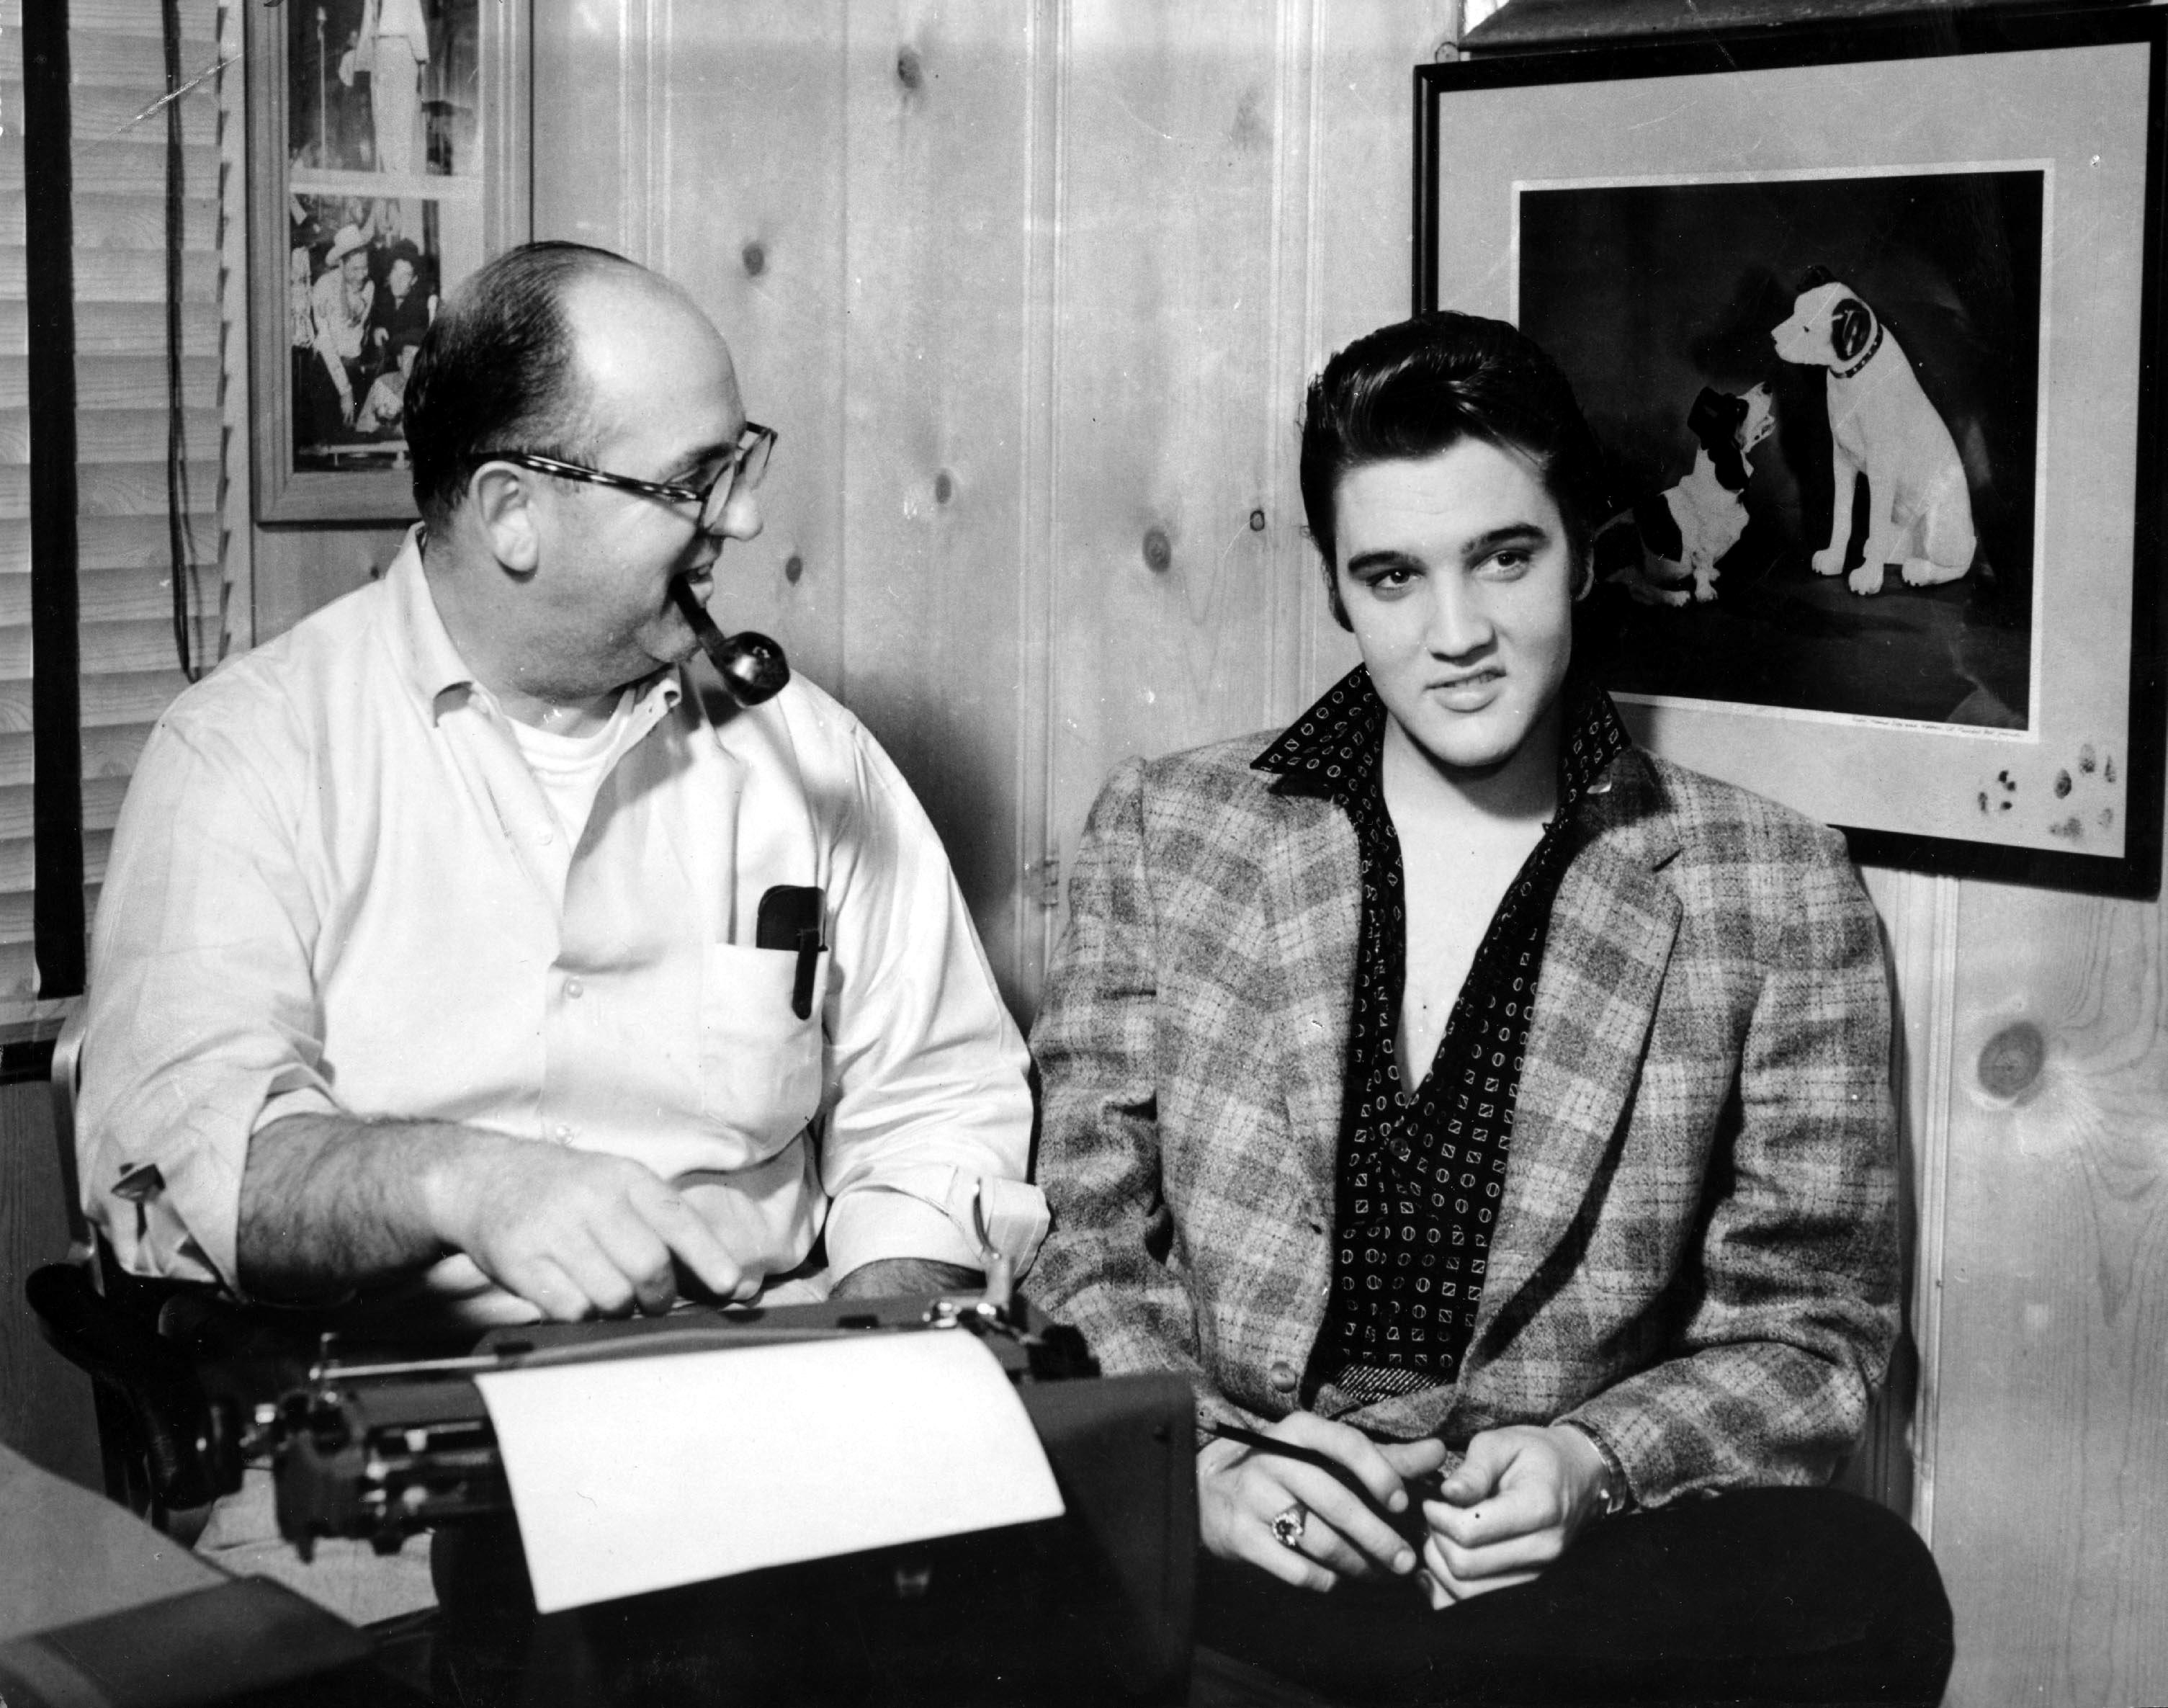 Colonel Tom Parker, Elvis Presley, and a picture of a dog